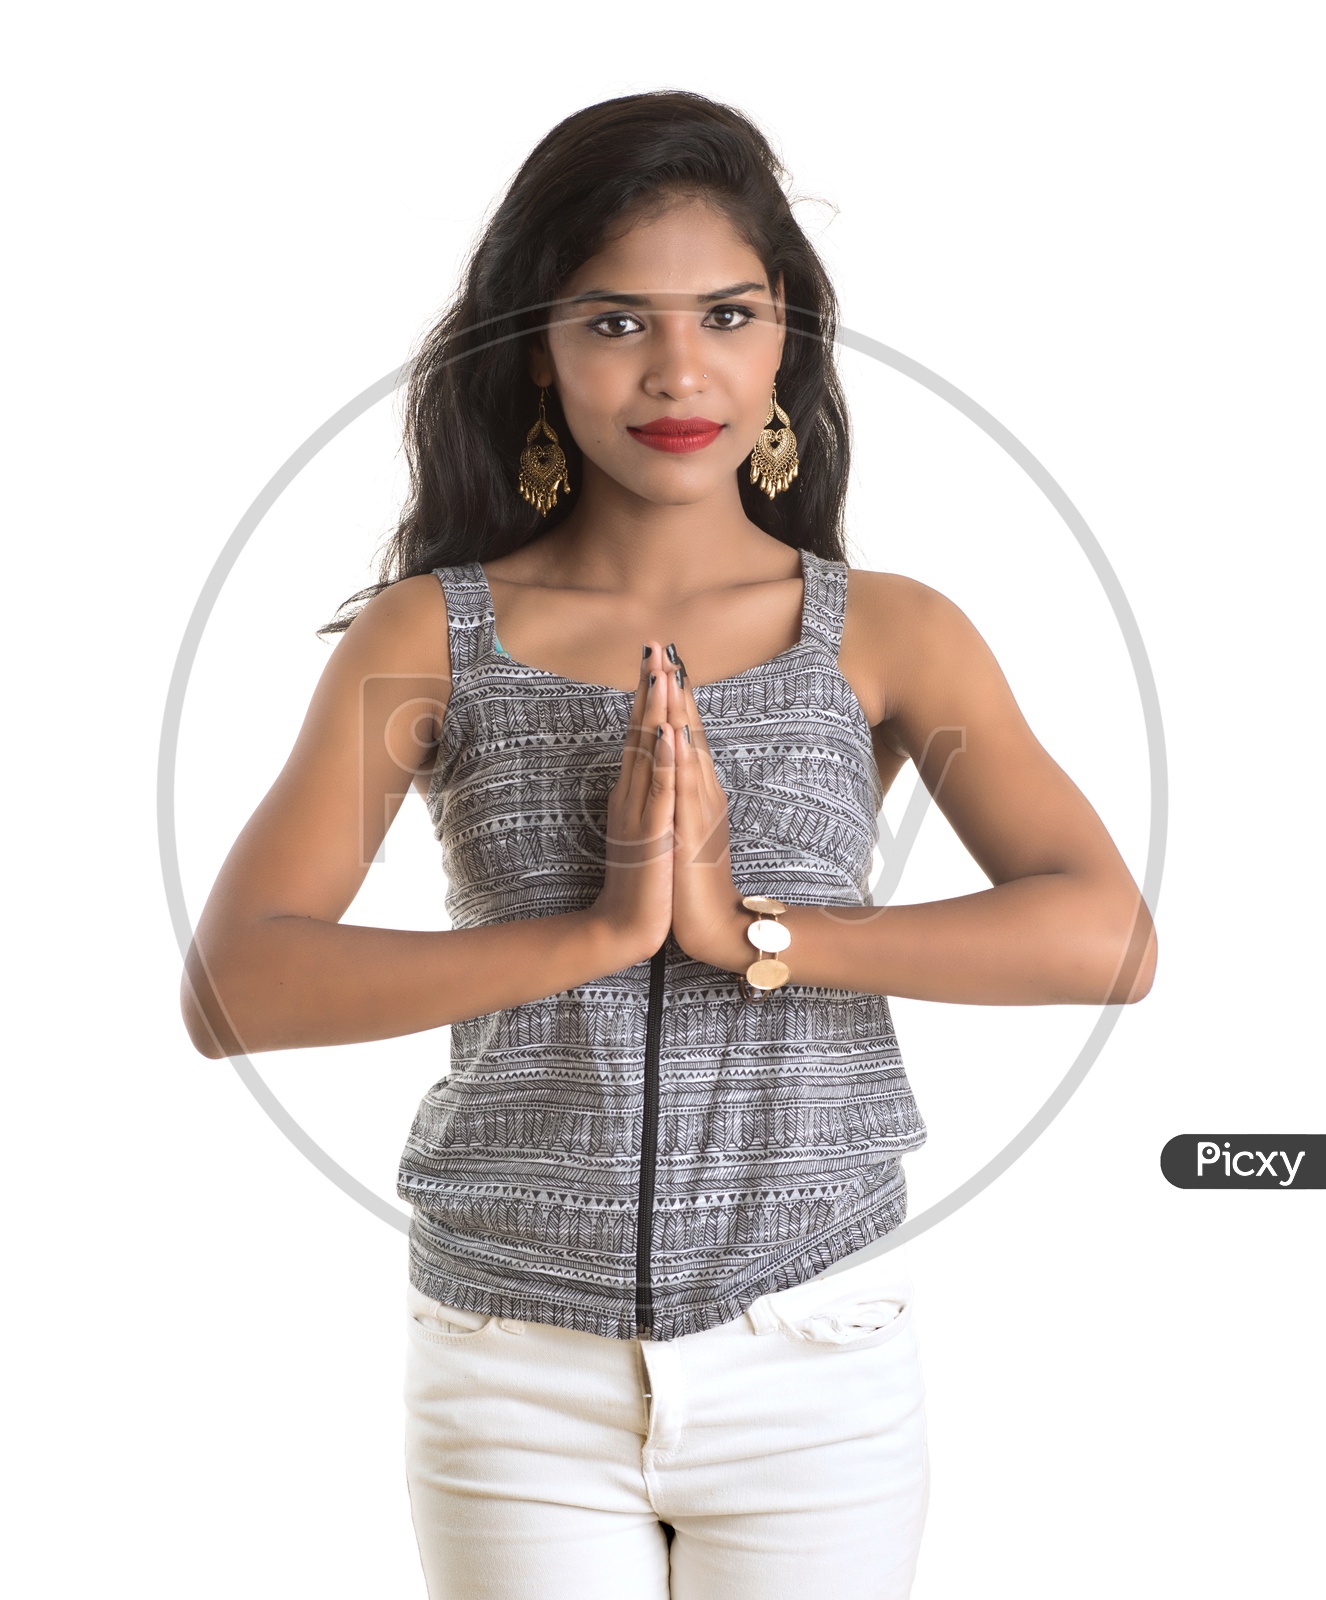 Pretty Young Girl With Namaste Gesture And With Smile Face On an Isolated White Background